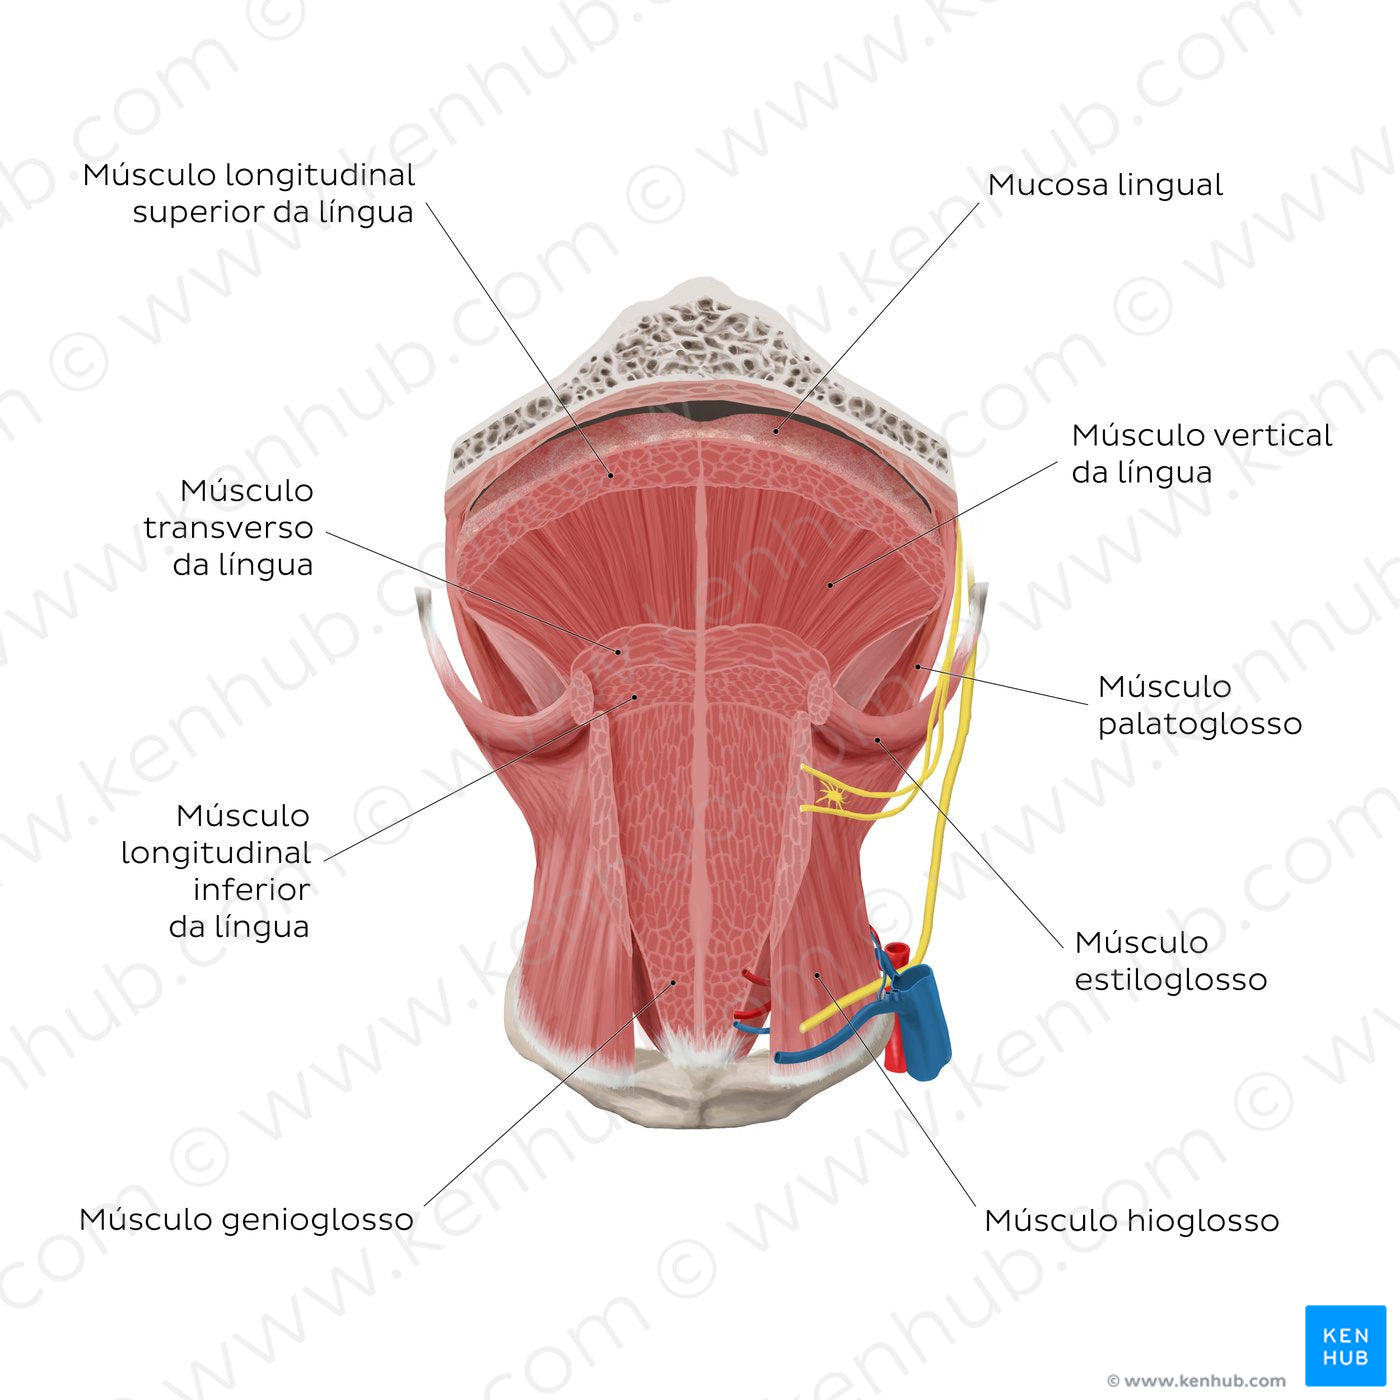 Muscles of the tongue: coronal section (Portuguese)